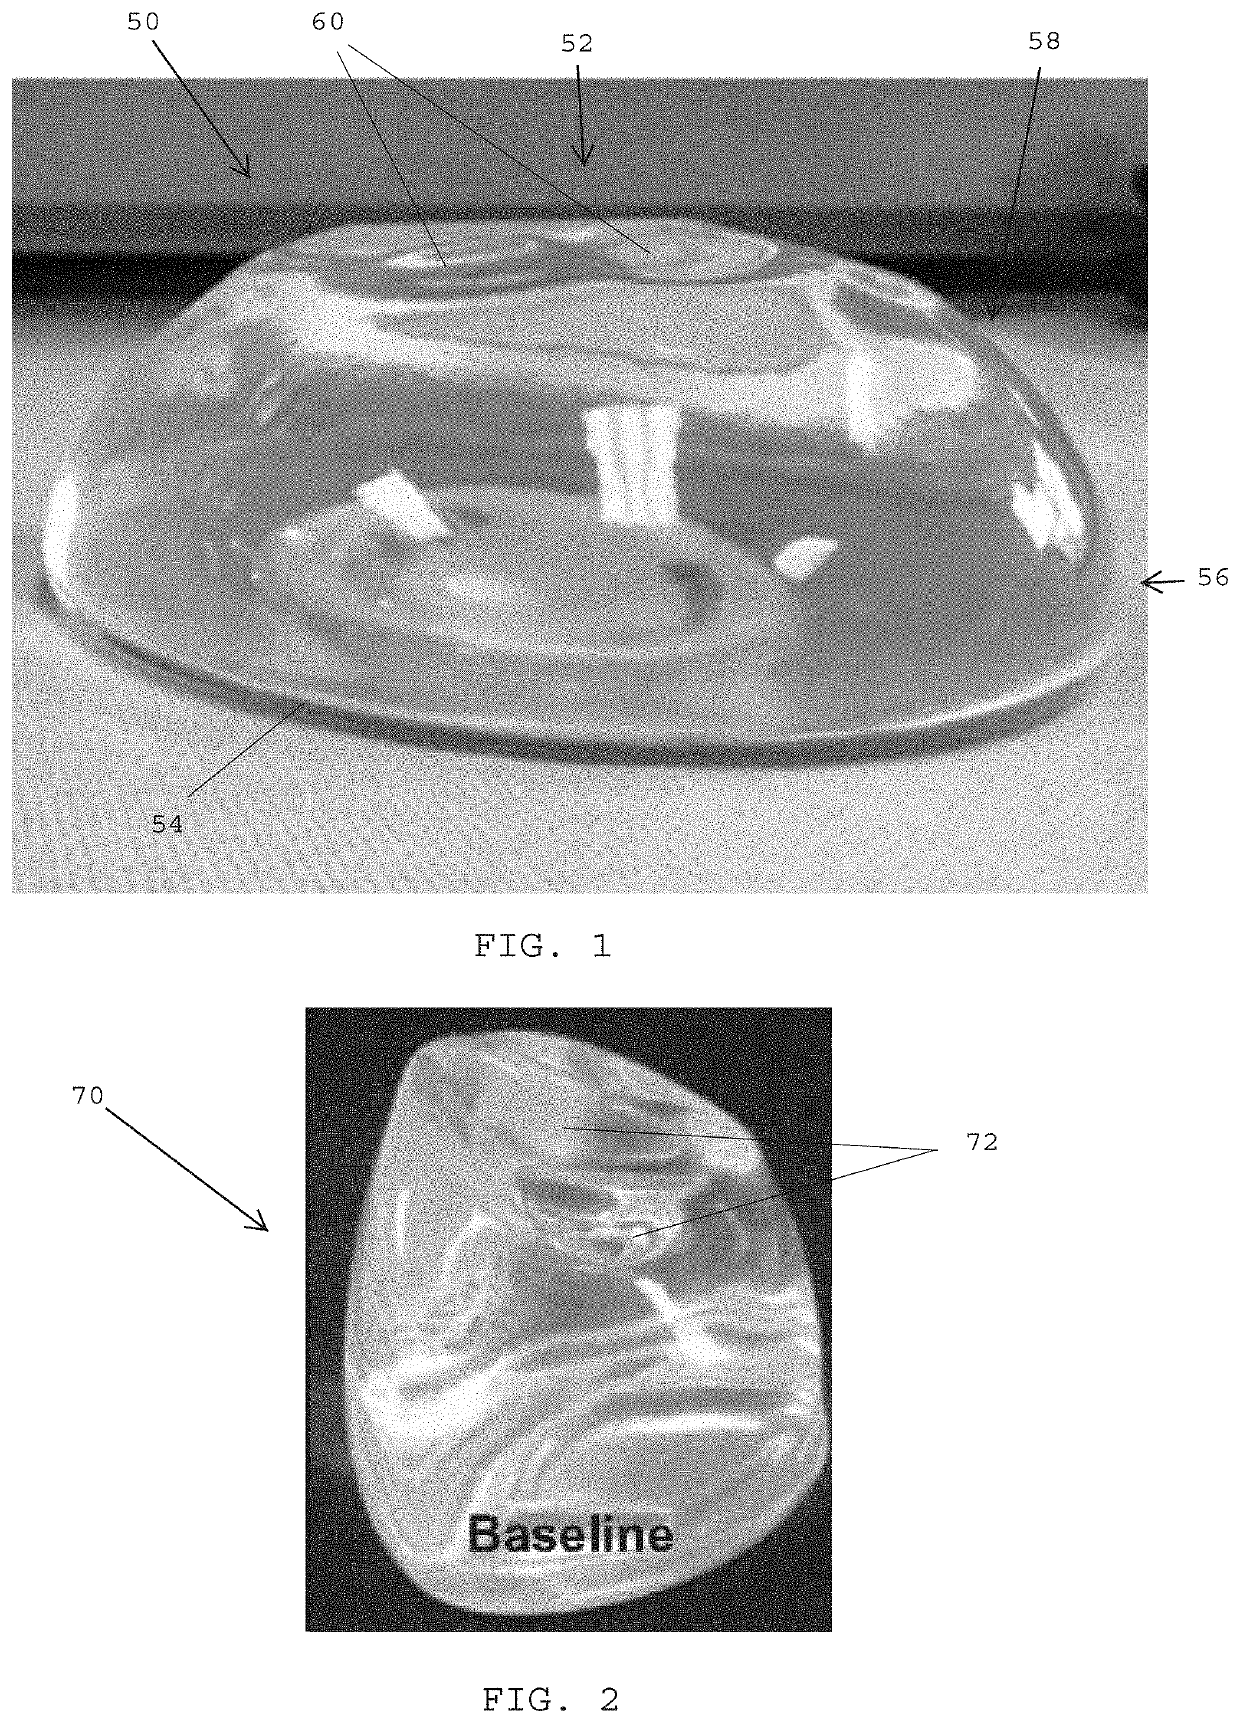 Systems, devices and methods of making mammary implants and tissue expanders having ribbed shells